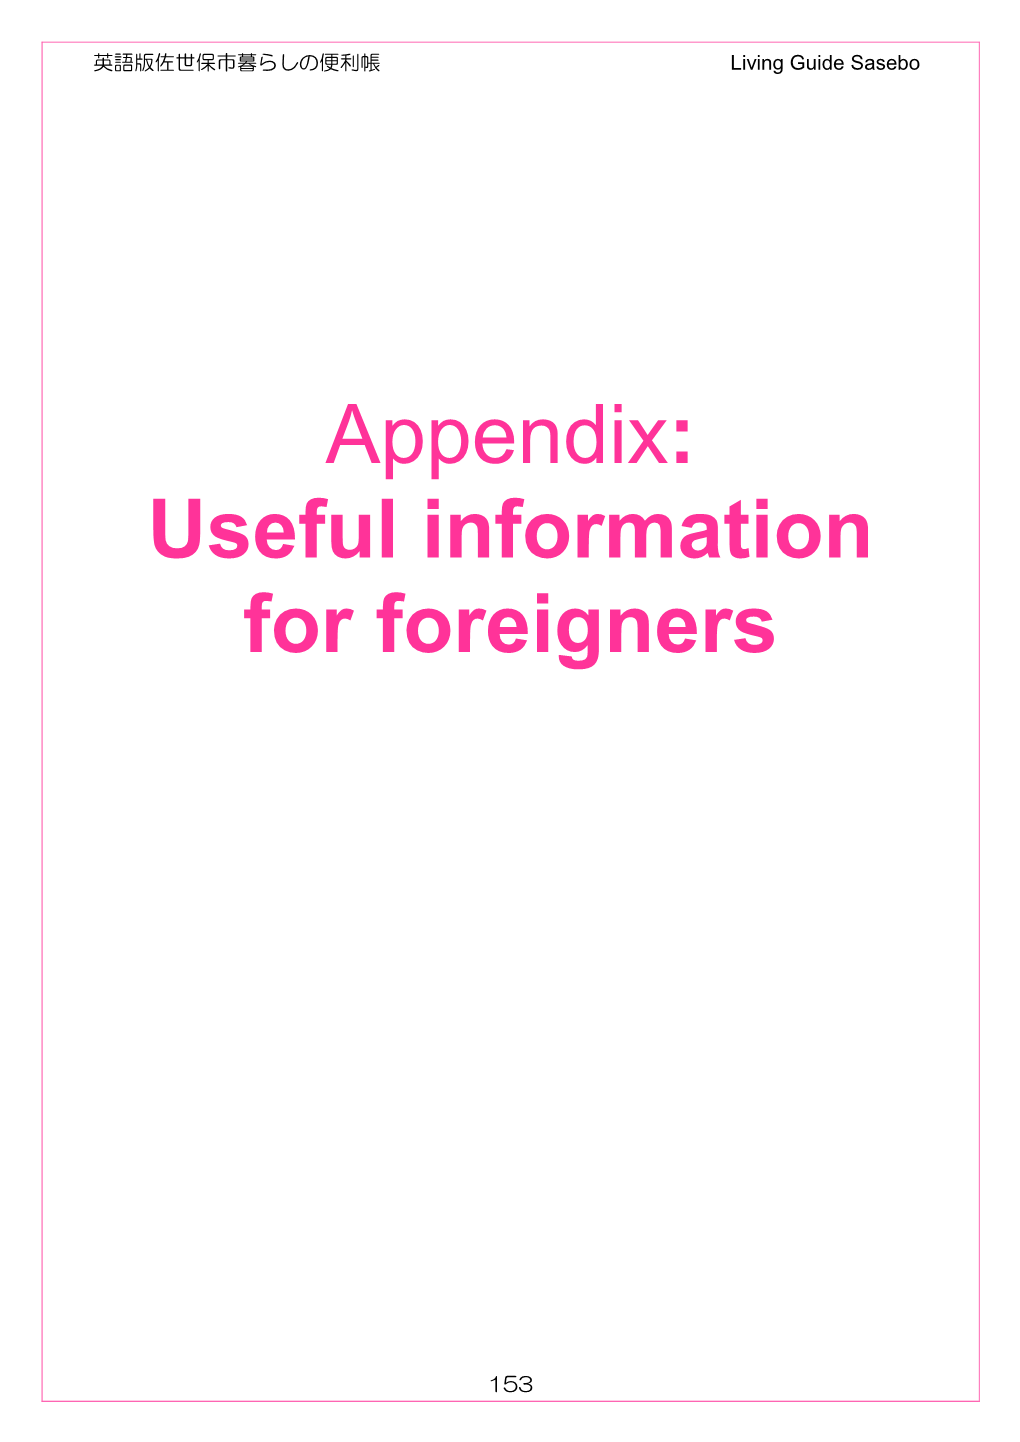 Appendix: Useful Information for Foreigners